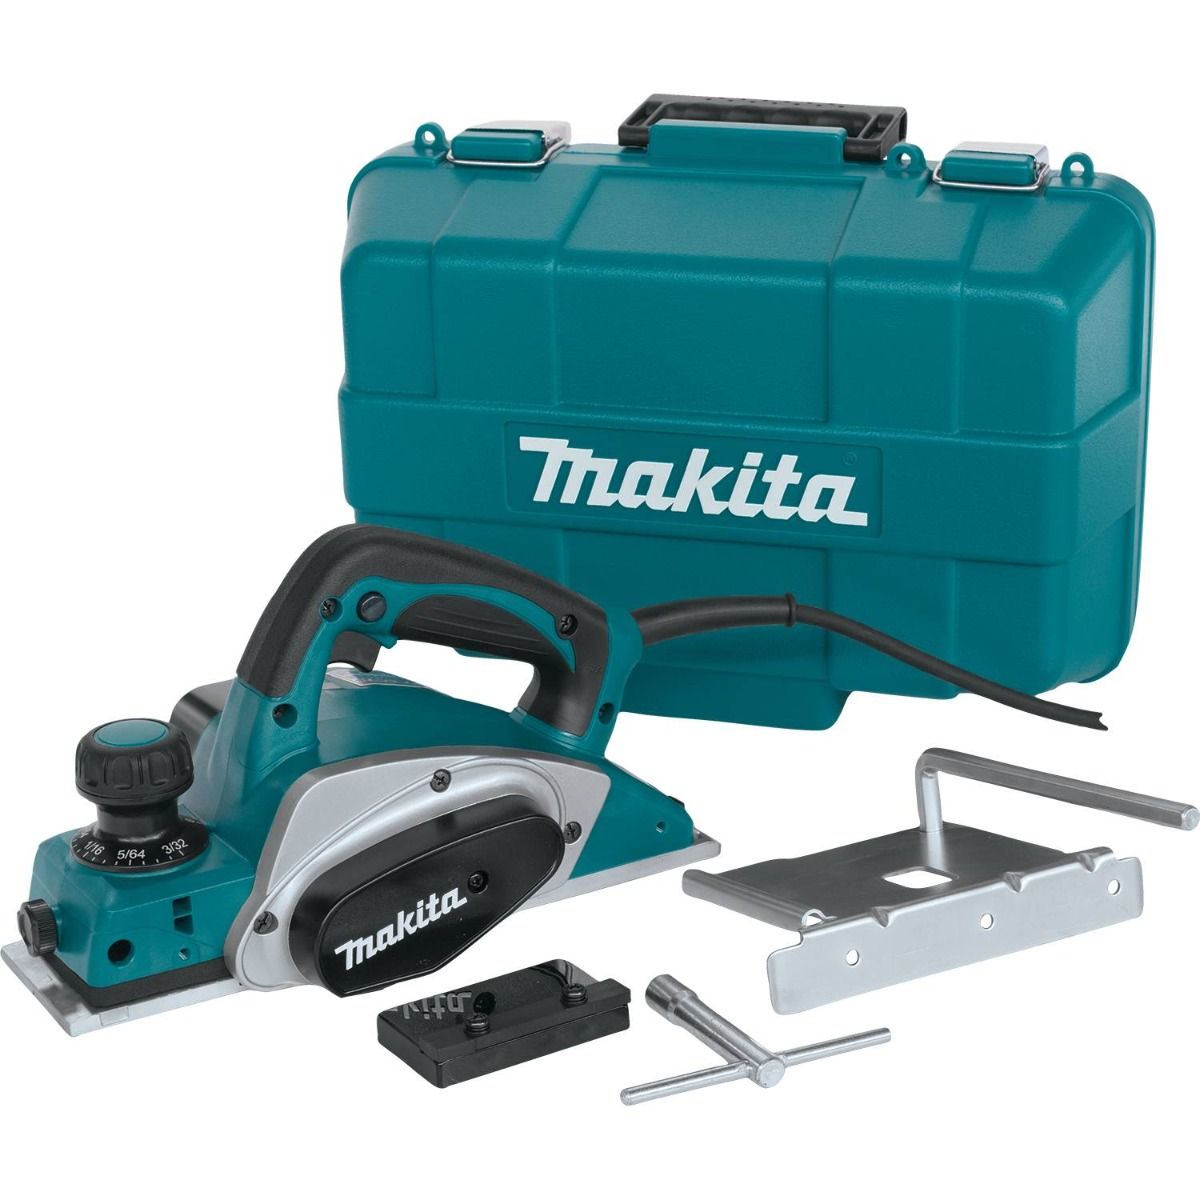 Makita KP0800K 3-1/4" Planer, with Tool Case Dynamite Tool